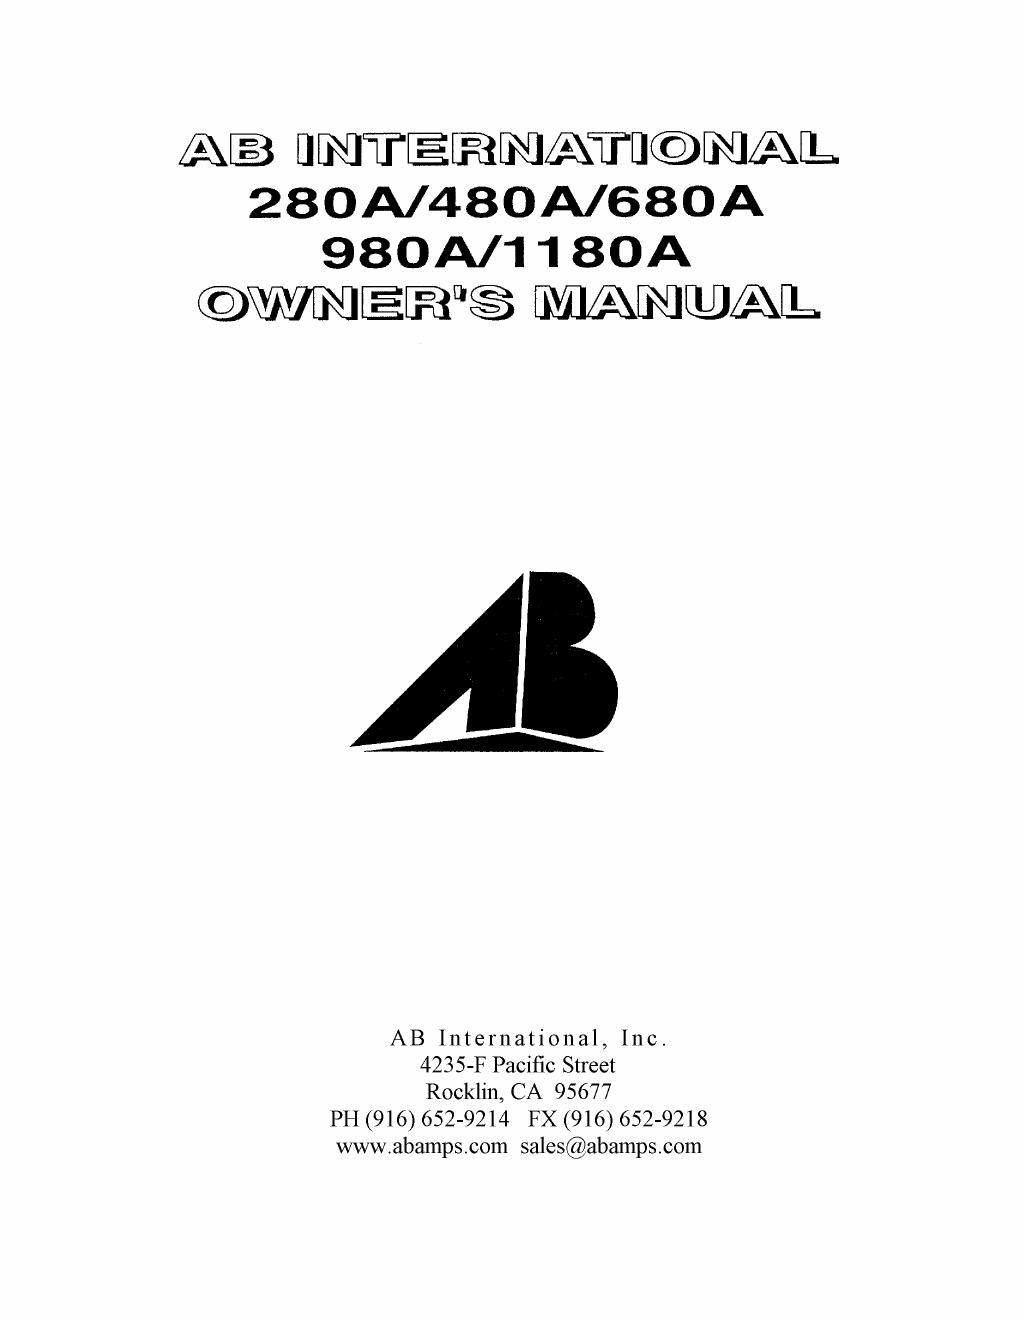 ab international 980 a owners manual